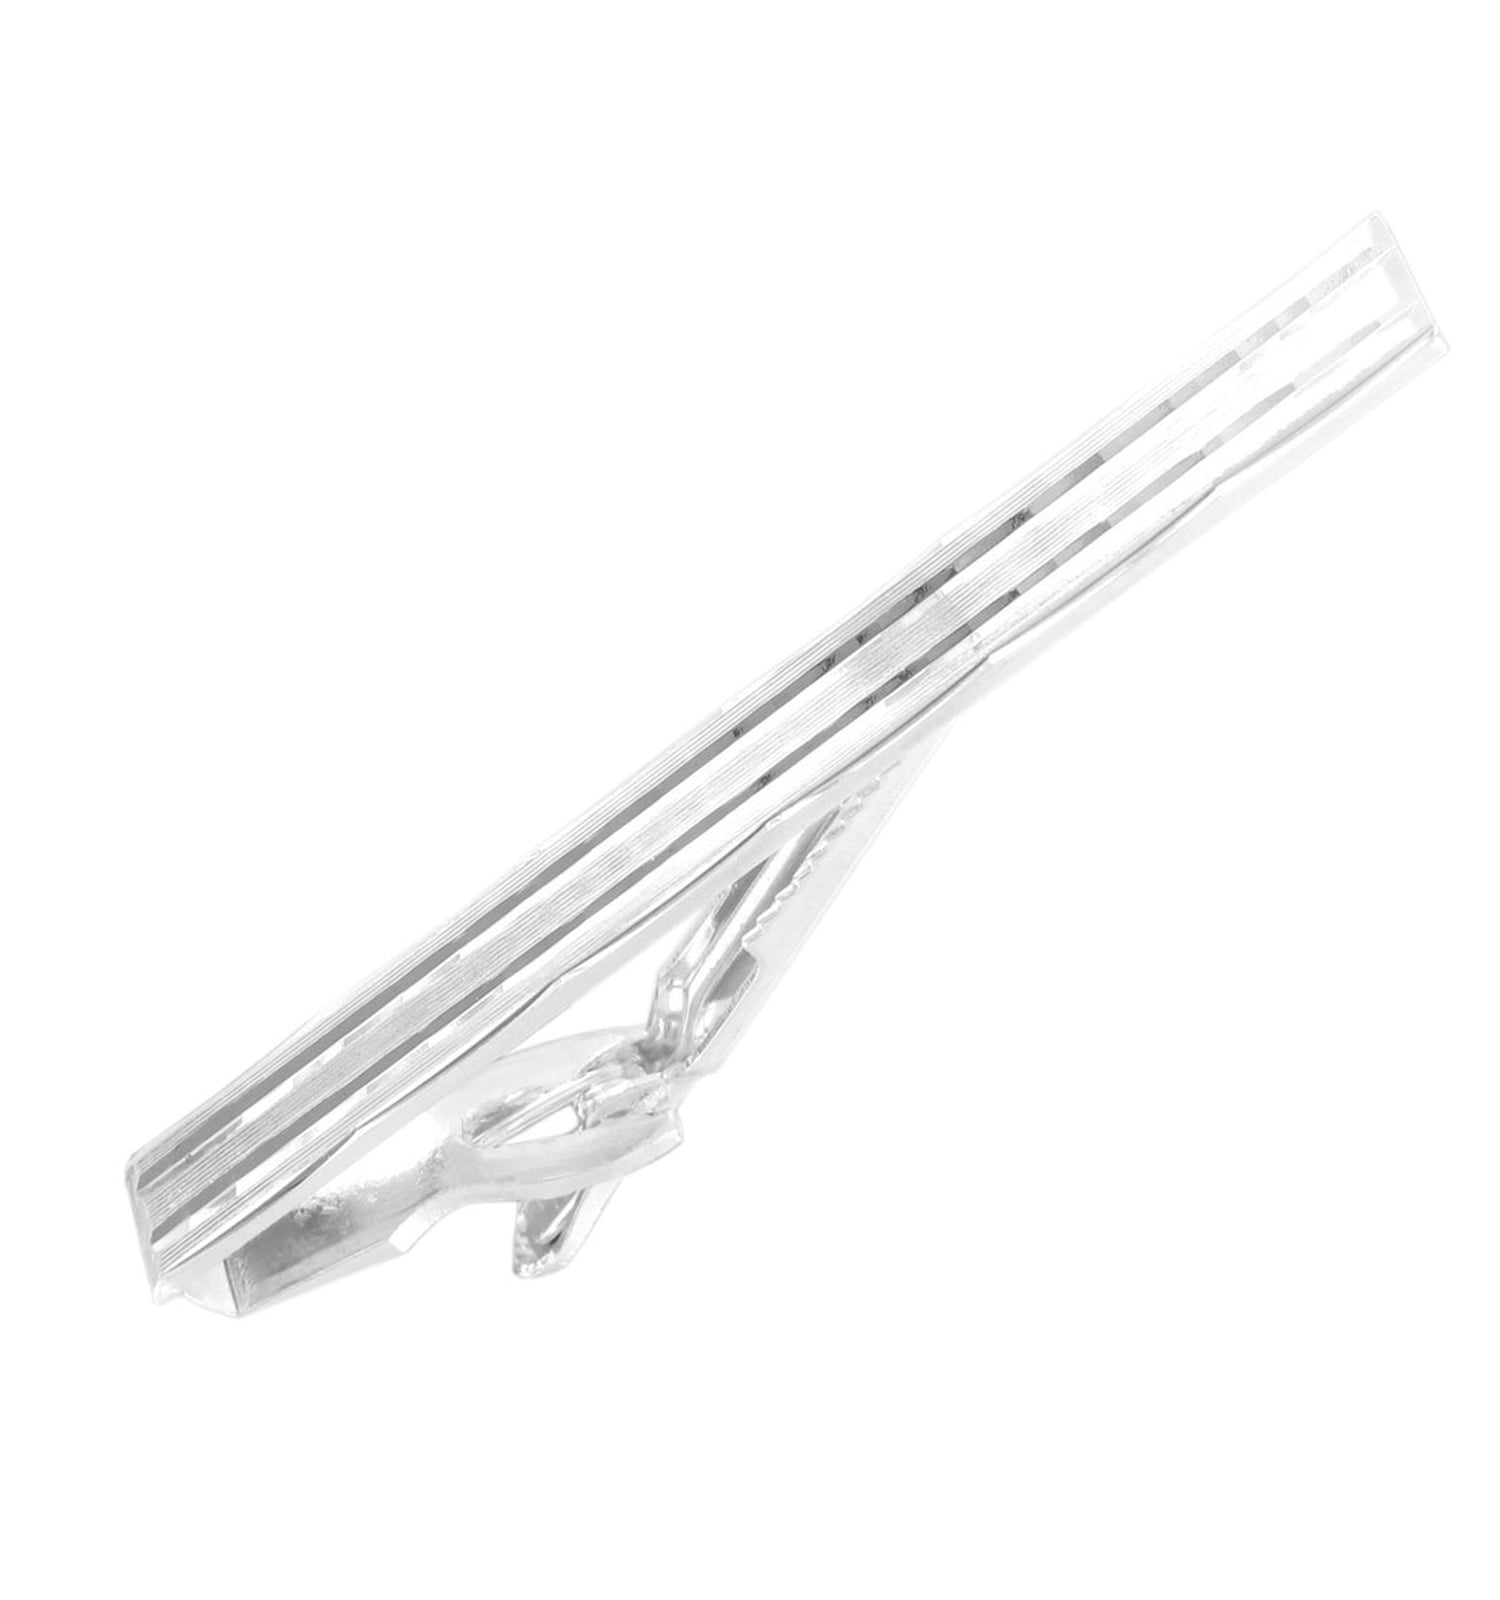 Silver Tone Classic Etched Lines Tie Clip Bar Clasp Large 2 1/2" Mens Adult Male